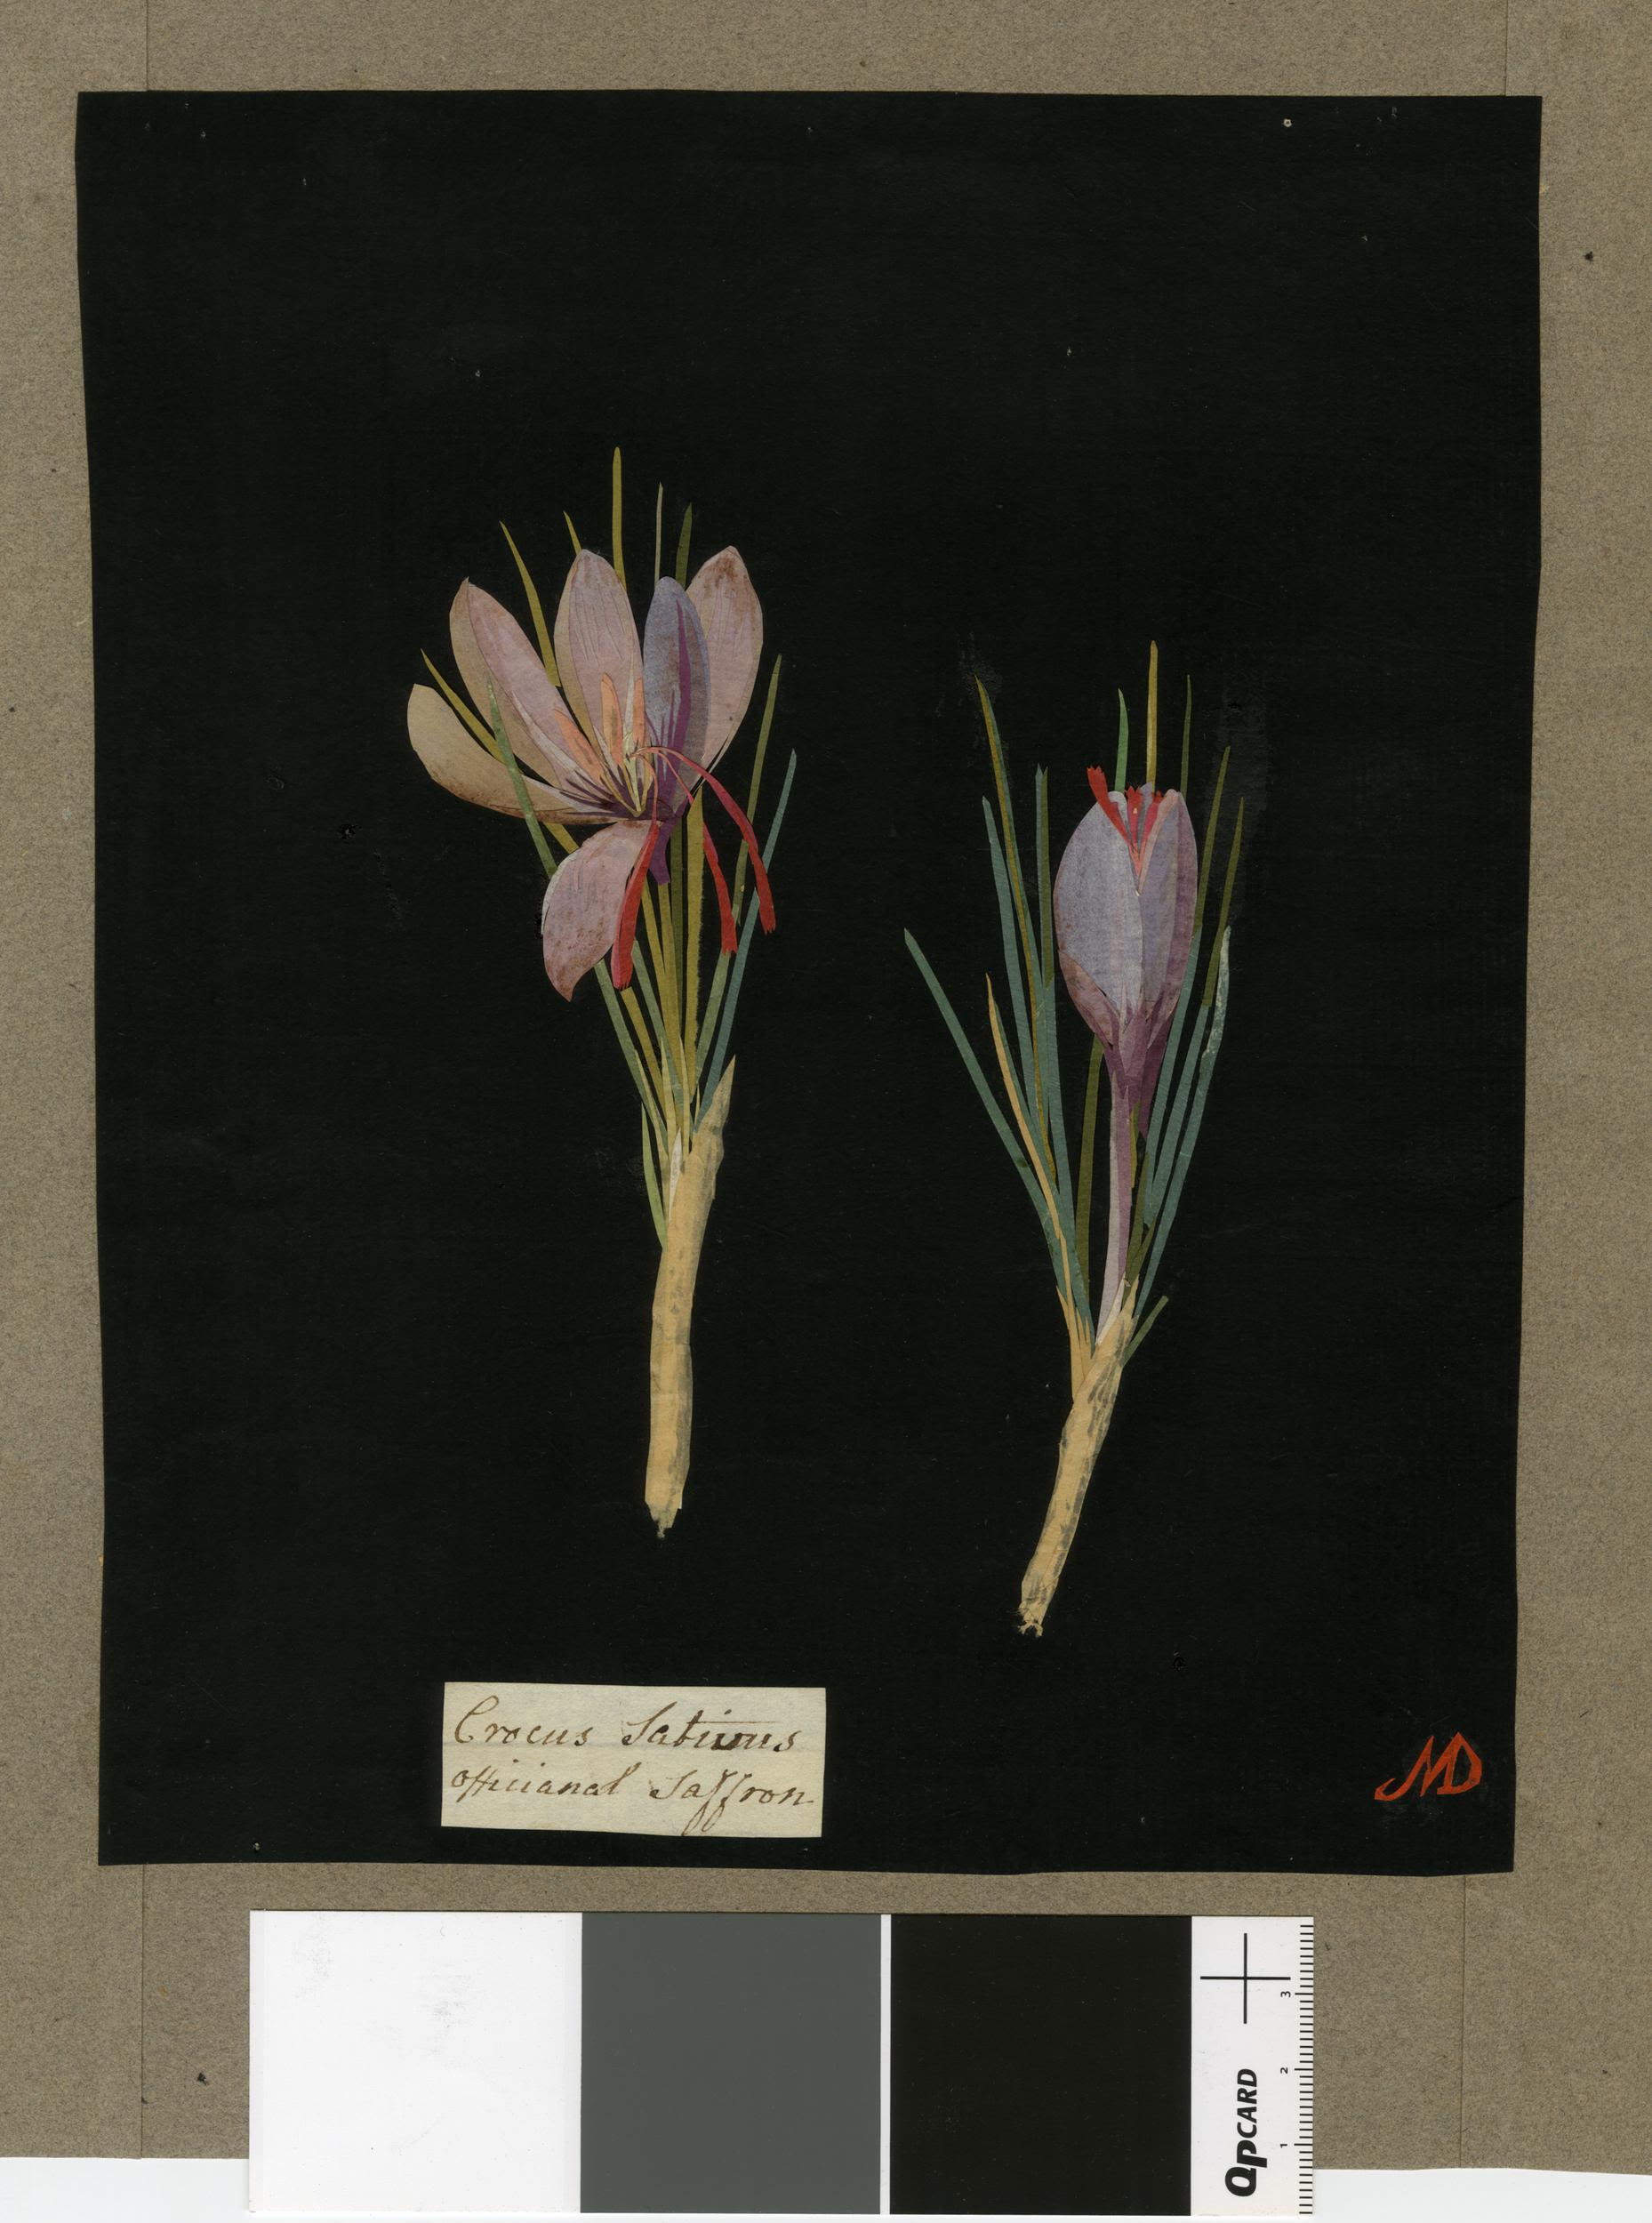 A collage of purple crocus flowers with bright red stems on a black background.